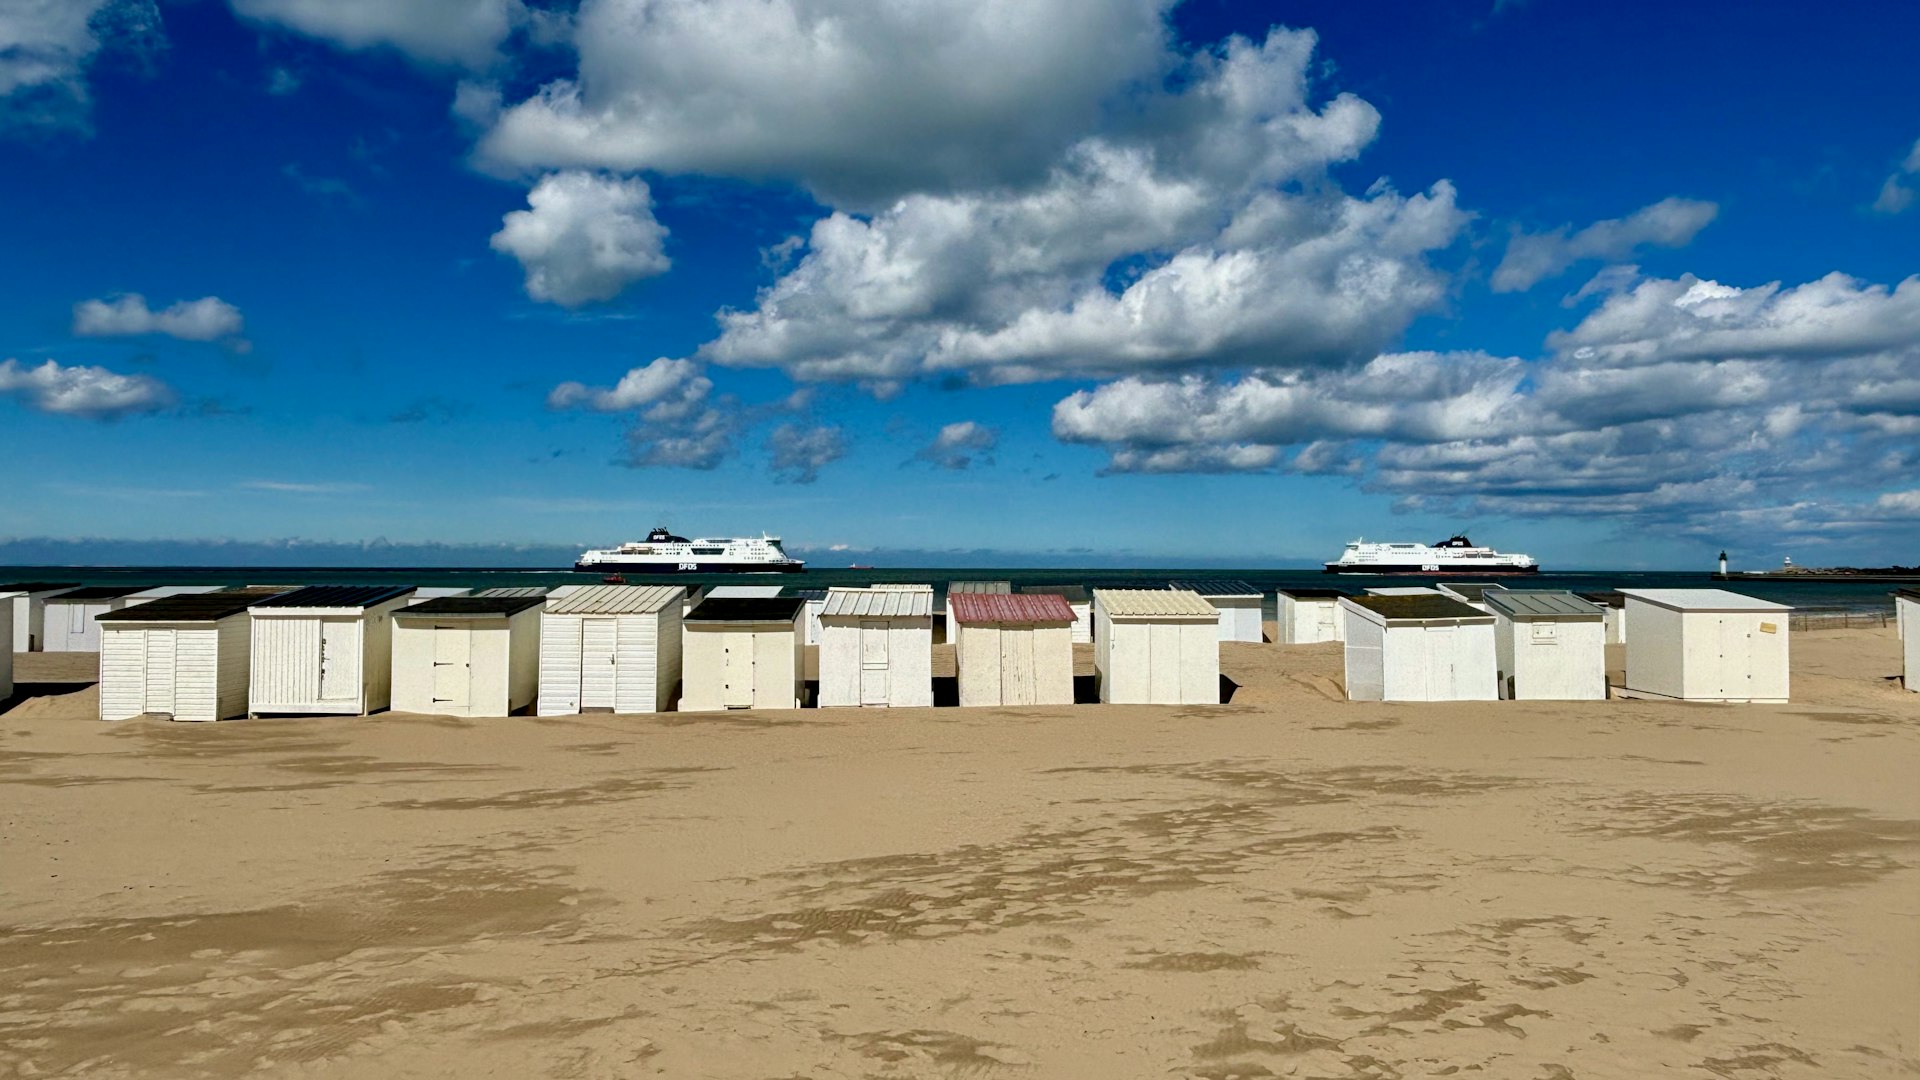 Two ferries out at sea with a row of beach huts in the foreground